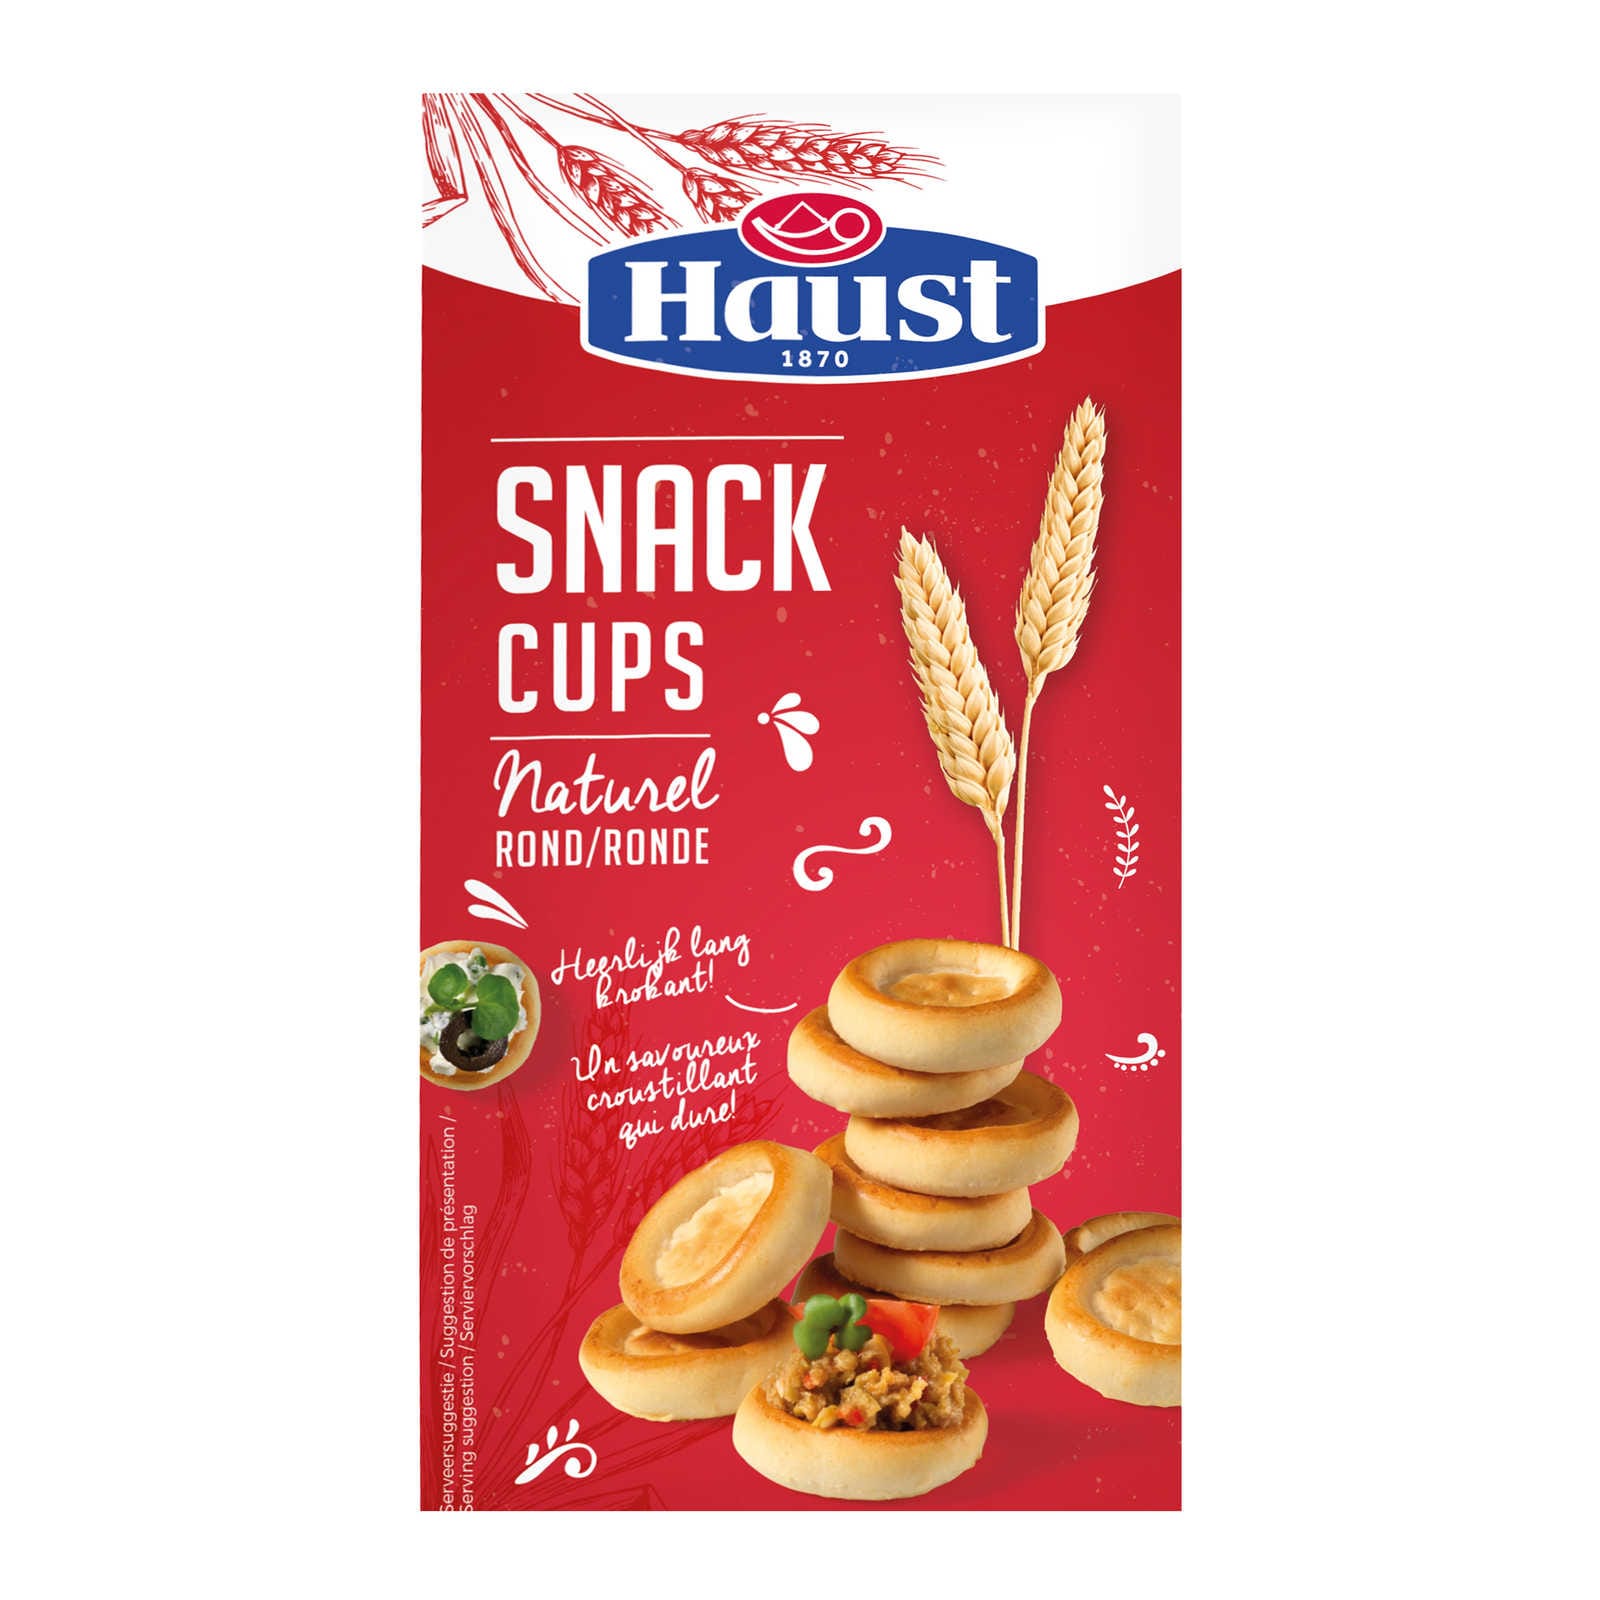 Haust snack cups